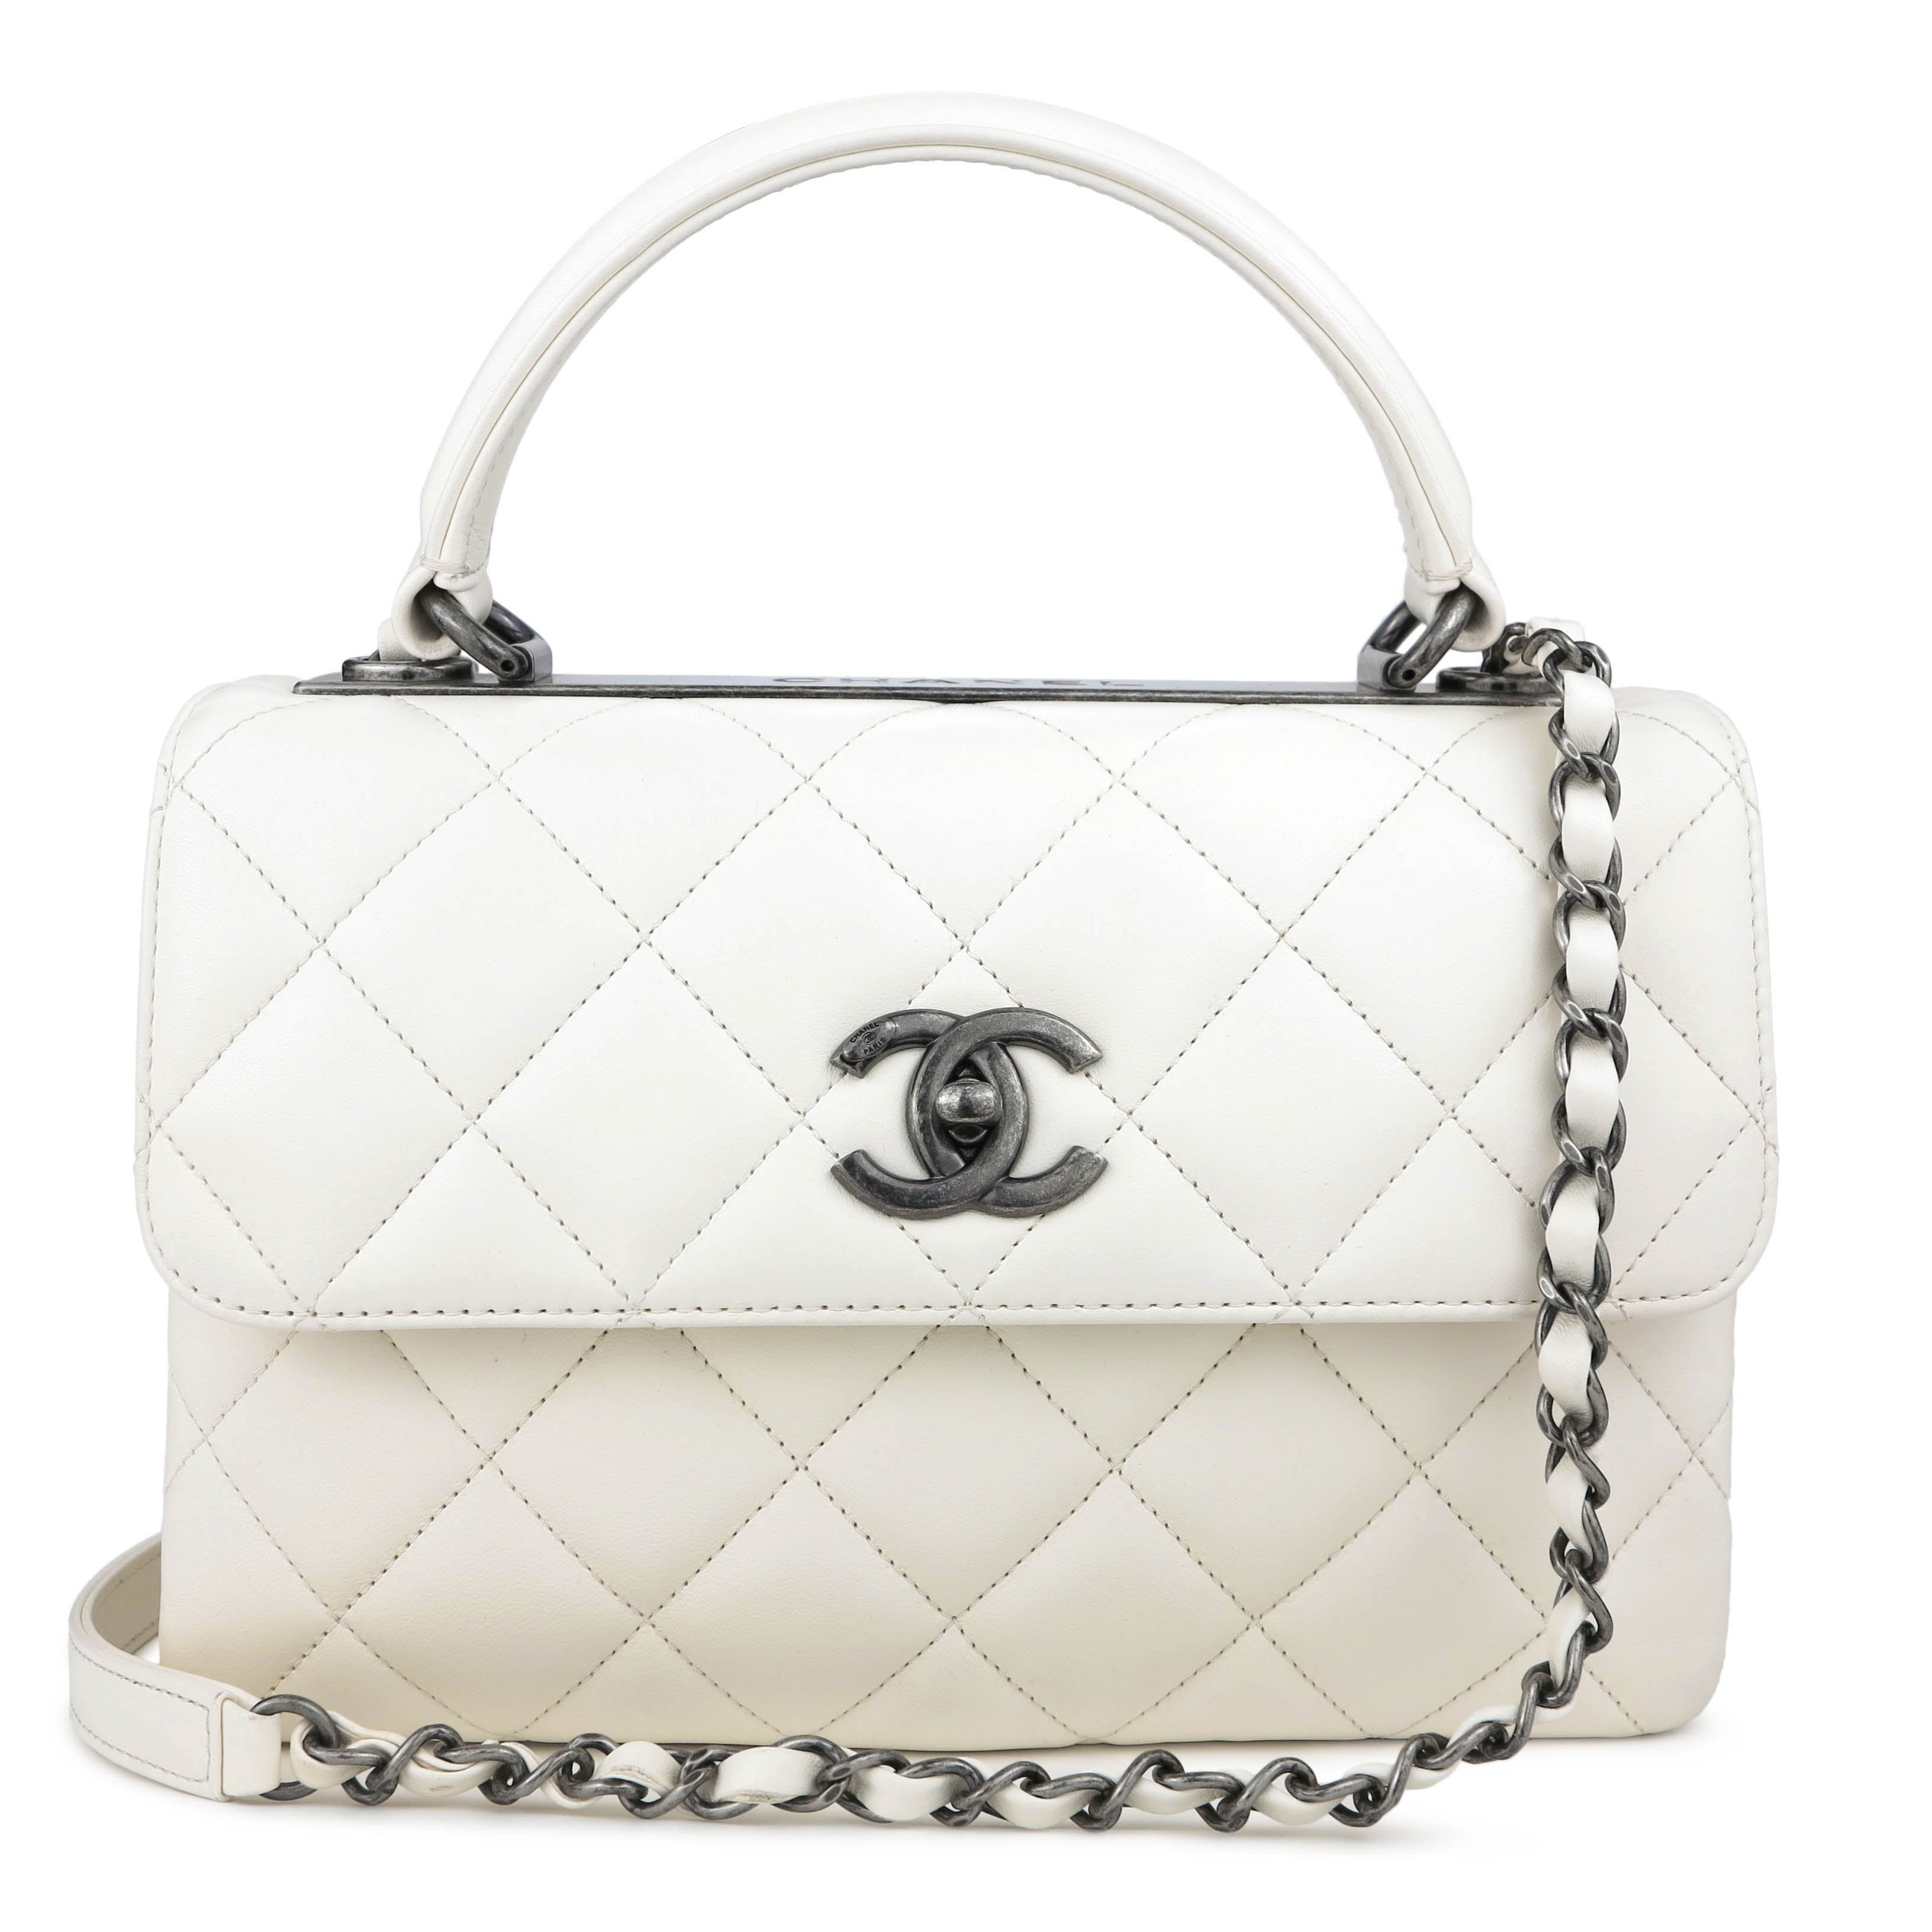 CHANEL Small Trendy CC Flap Bag with Top Handle in Ivory